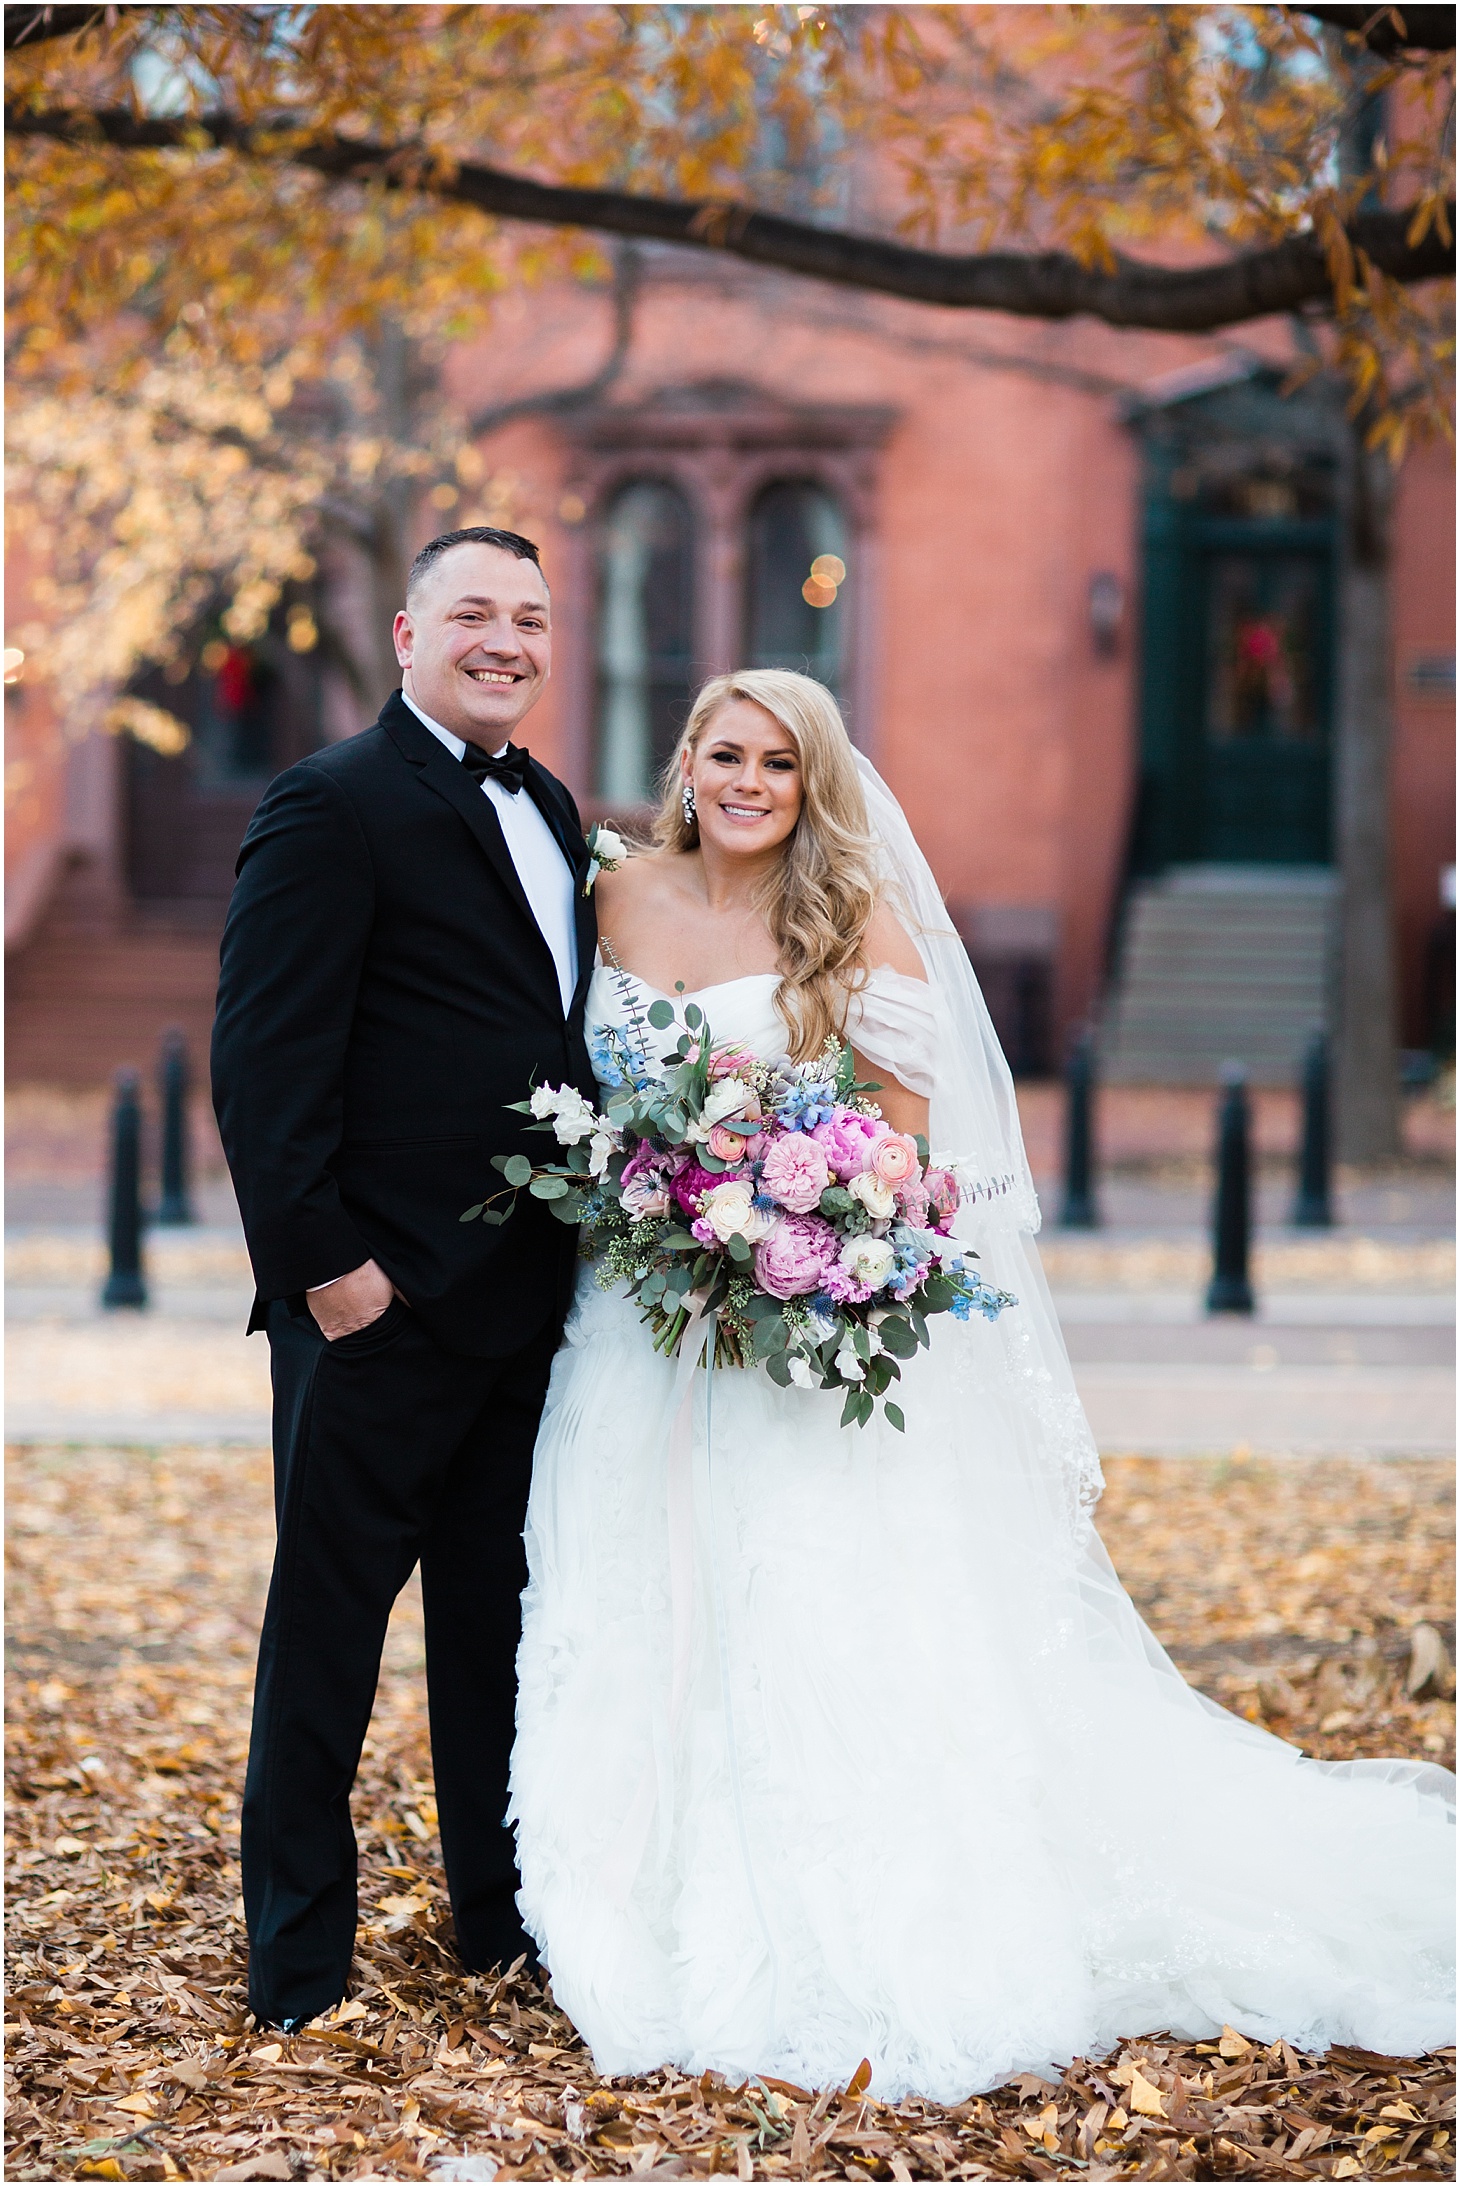 Wedding Portraits in LaFayette Square | Luxe Winter Wedding at the Army and Navy Club | Sarah Bradshaw Photography | Washington DC Wedding Photographer